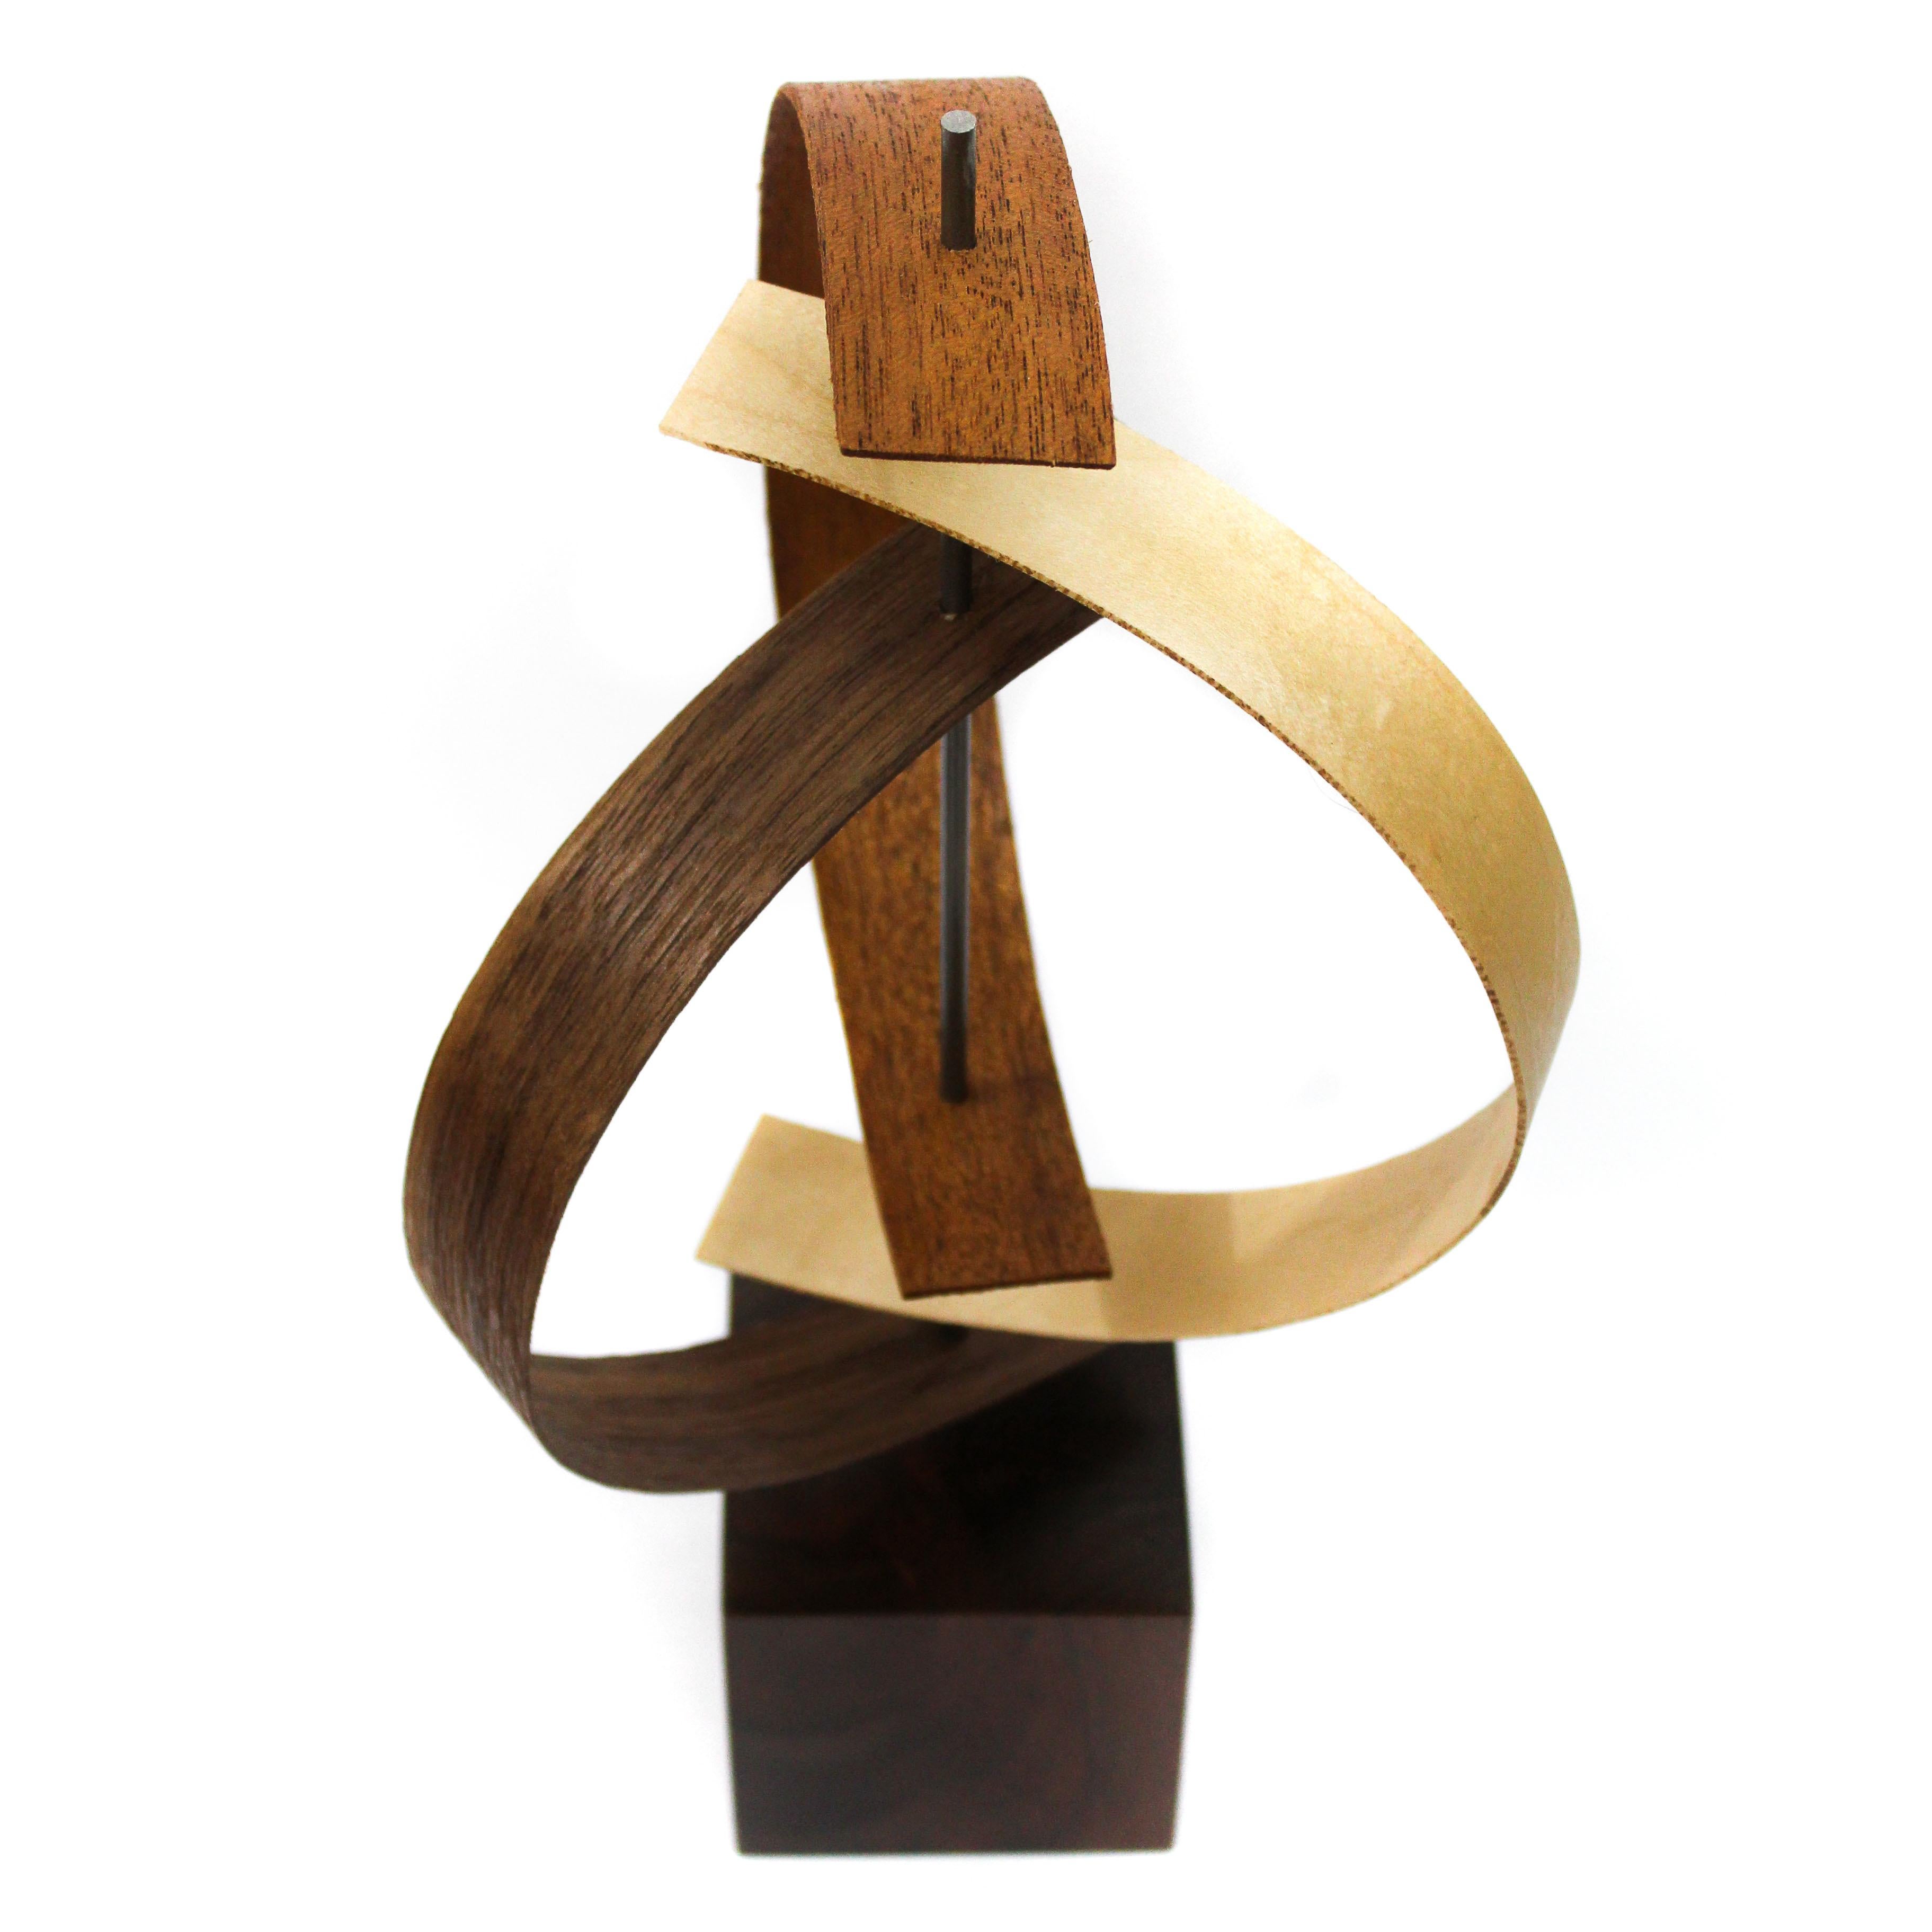 Wood Sculpture by Jeff L., Mid-Century Modern Inspired, Contemporary Abstract 2